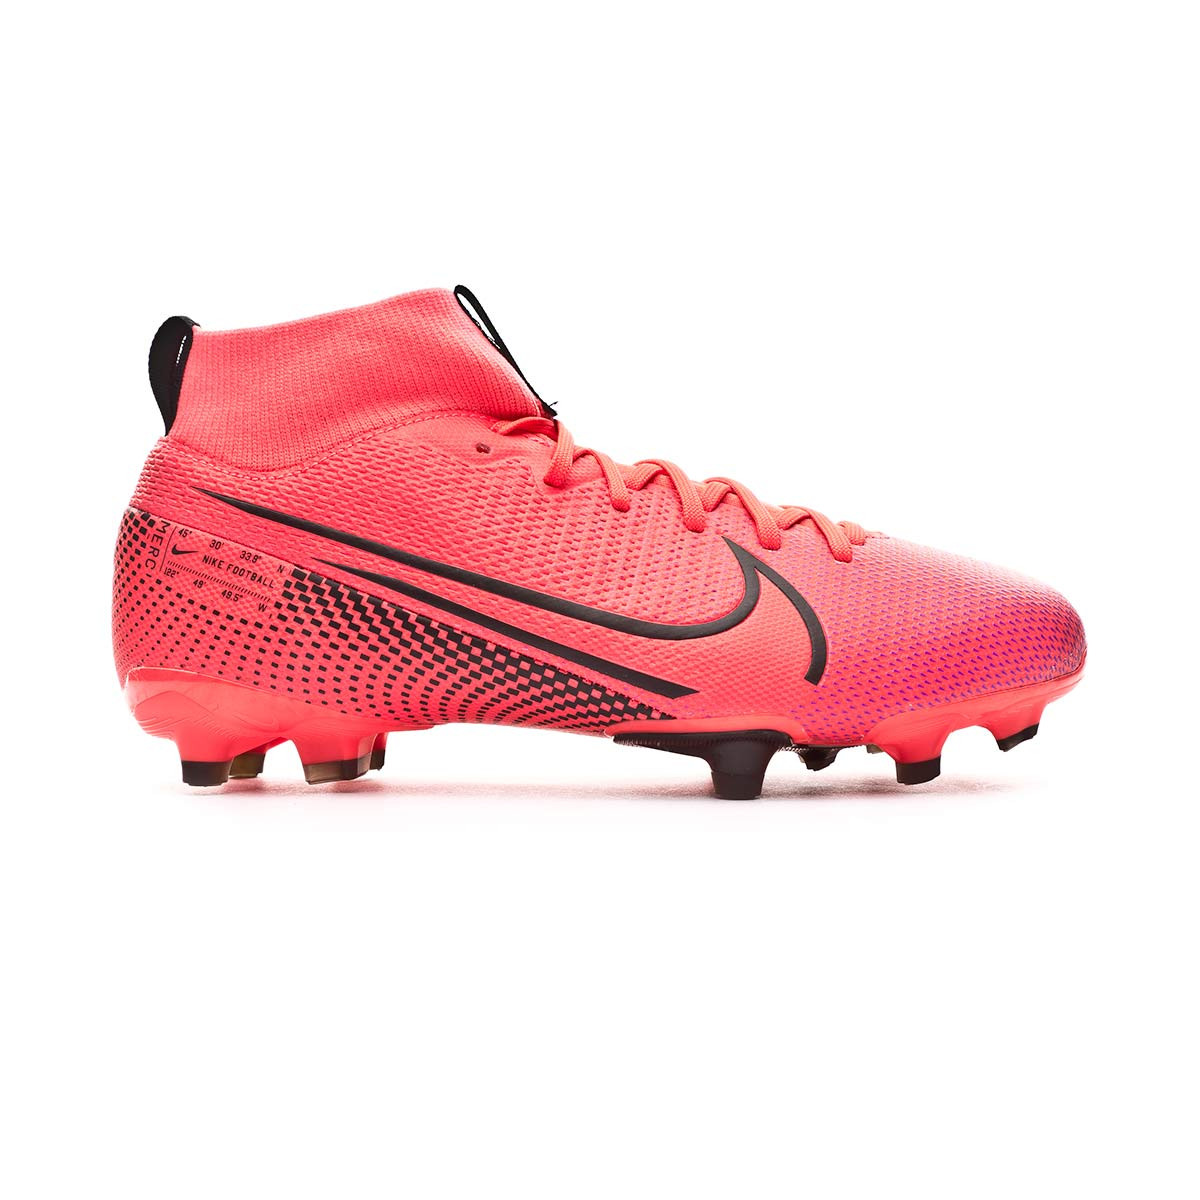 Nike Nike Mercurial Superfly 7 Acad MDS FG Youth